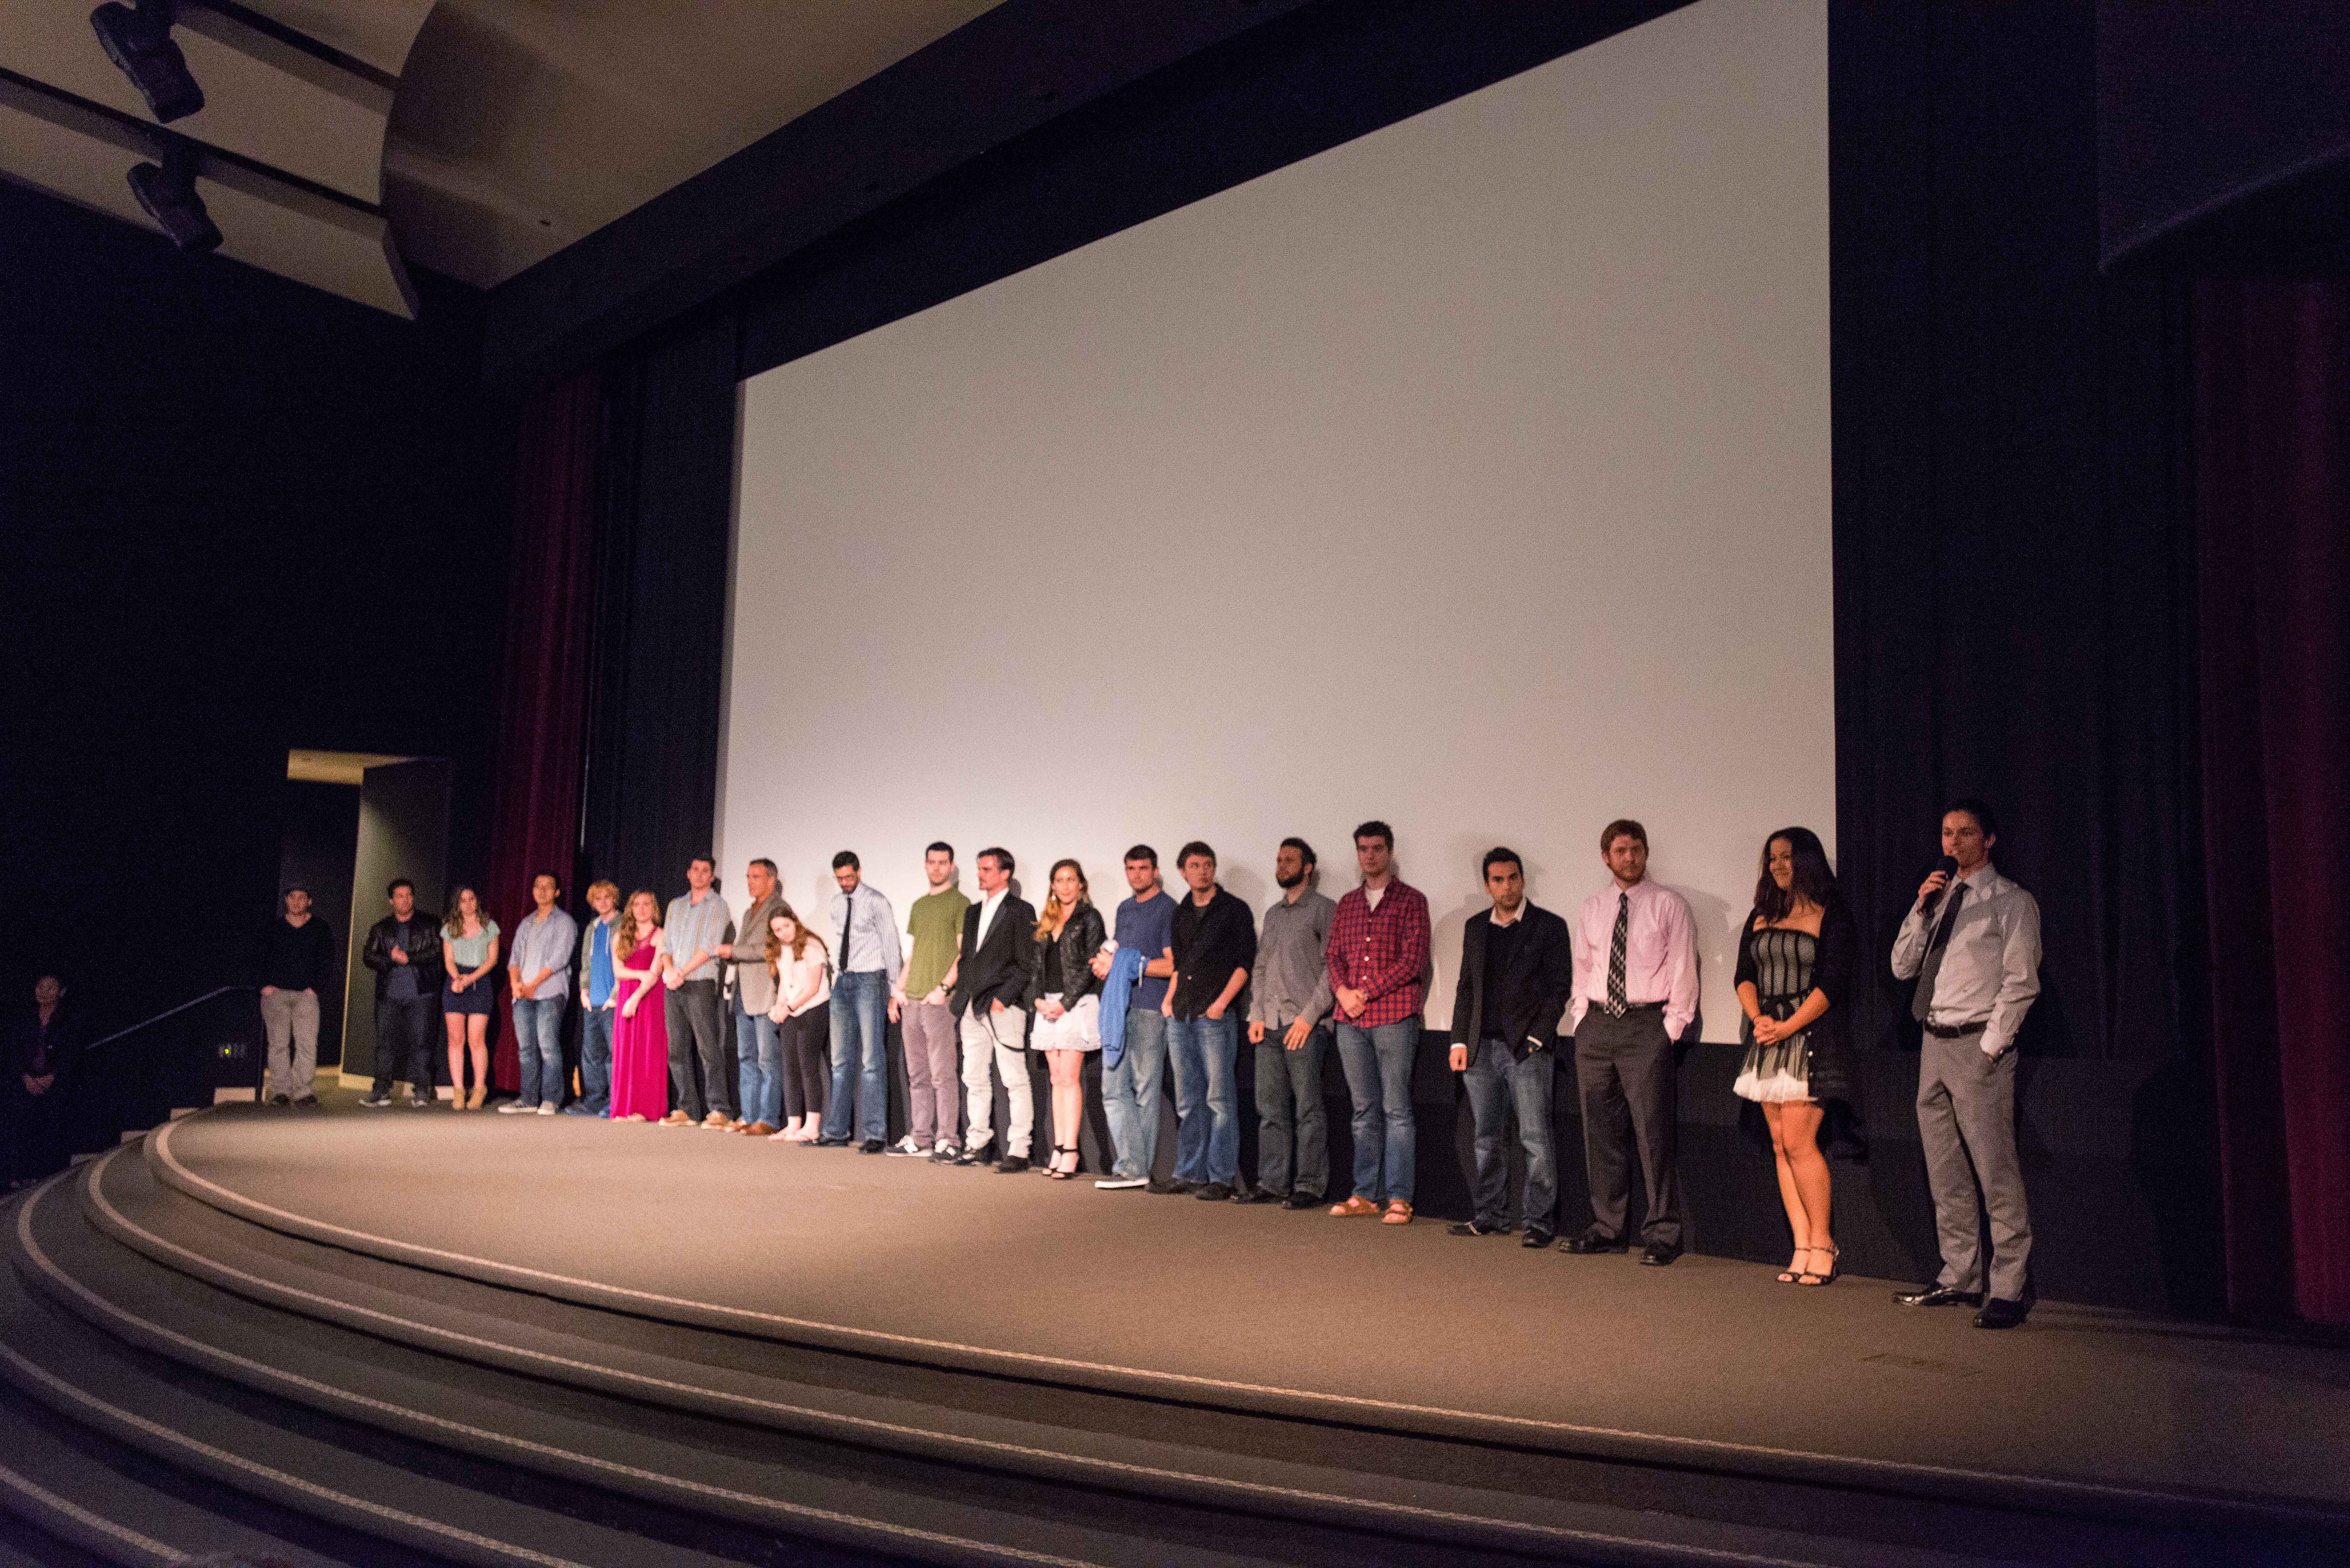 The Cast and Crew of 'From the Woods' at the premiere screening at Dodge College of Film and Media Arts | Chapman University